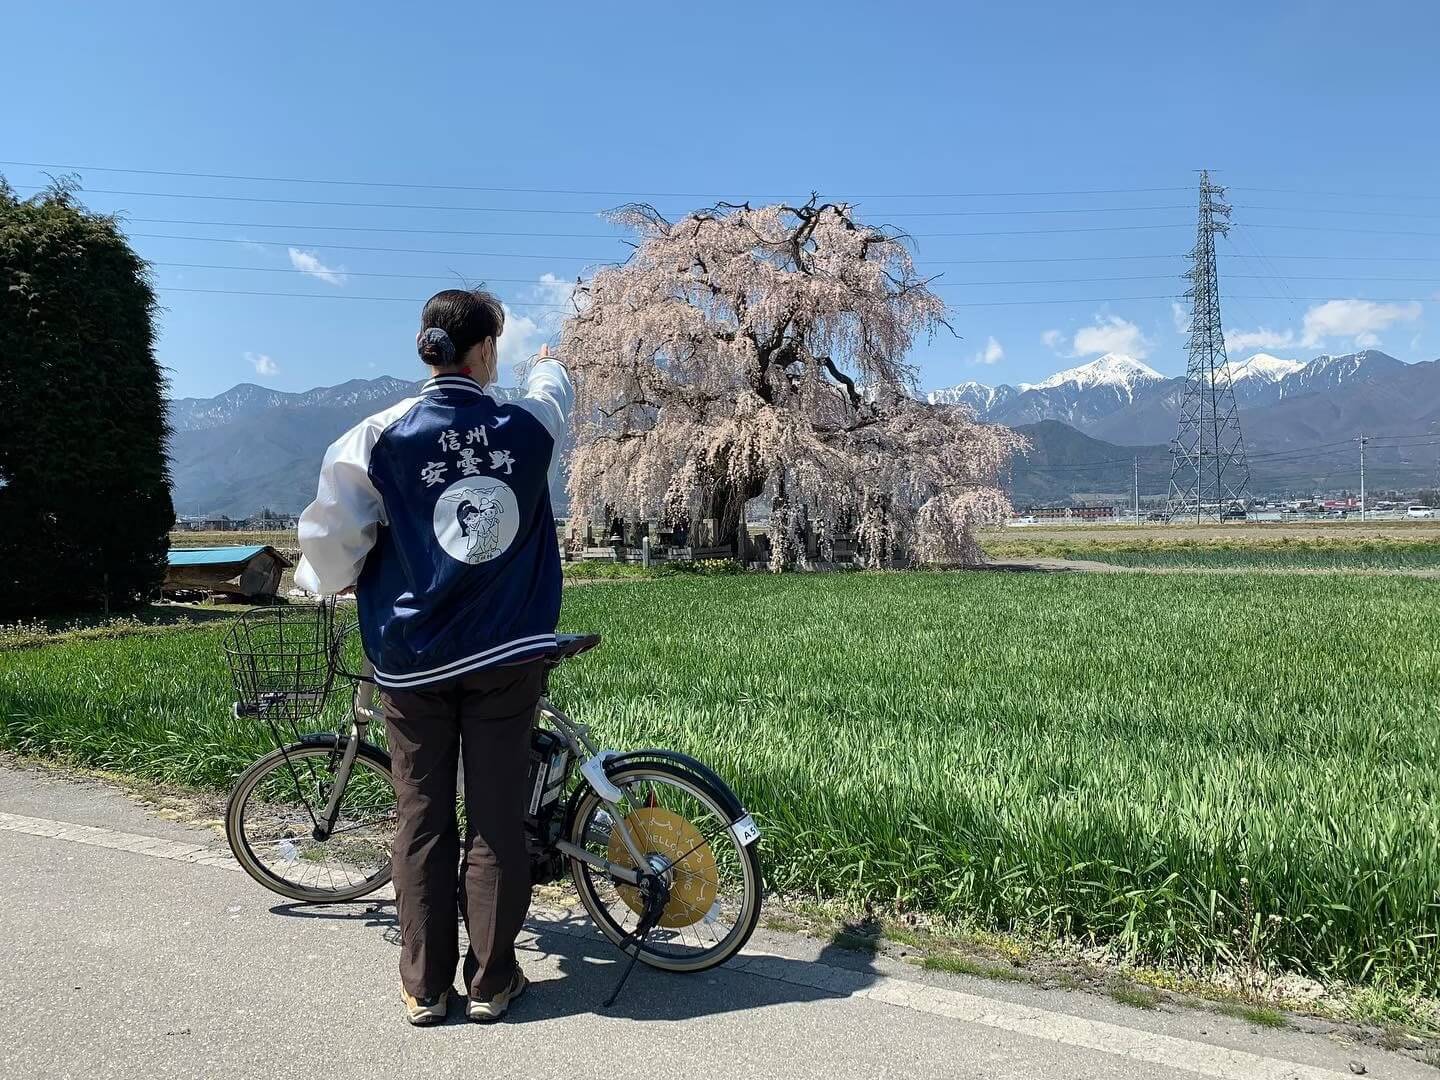 Go slow and experience rural Japan